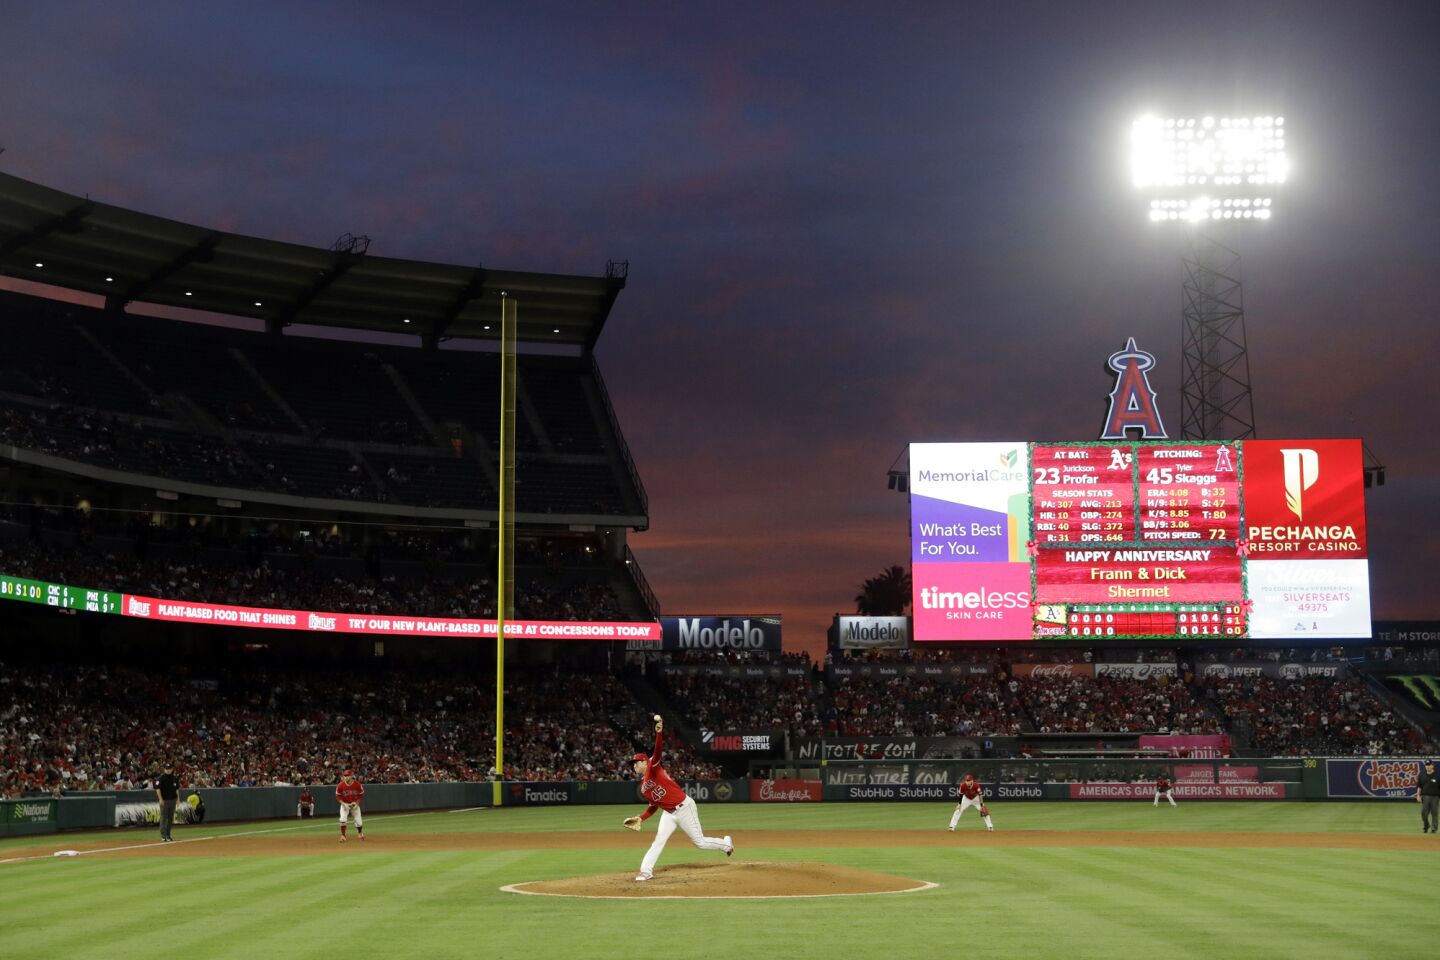 Los Angeles Angels starting pitcher Tyler Skaggs throws to an Oakland Athletics batter during the fifth inning of a baseball game in Anaheim on June 29, 2019.